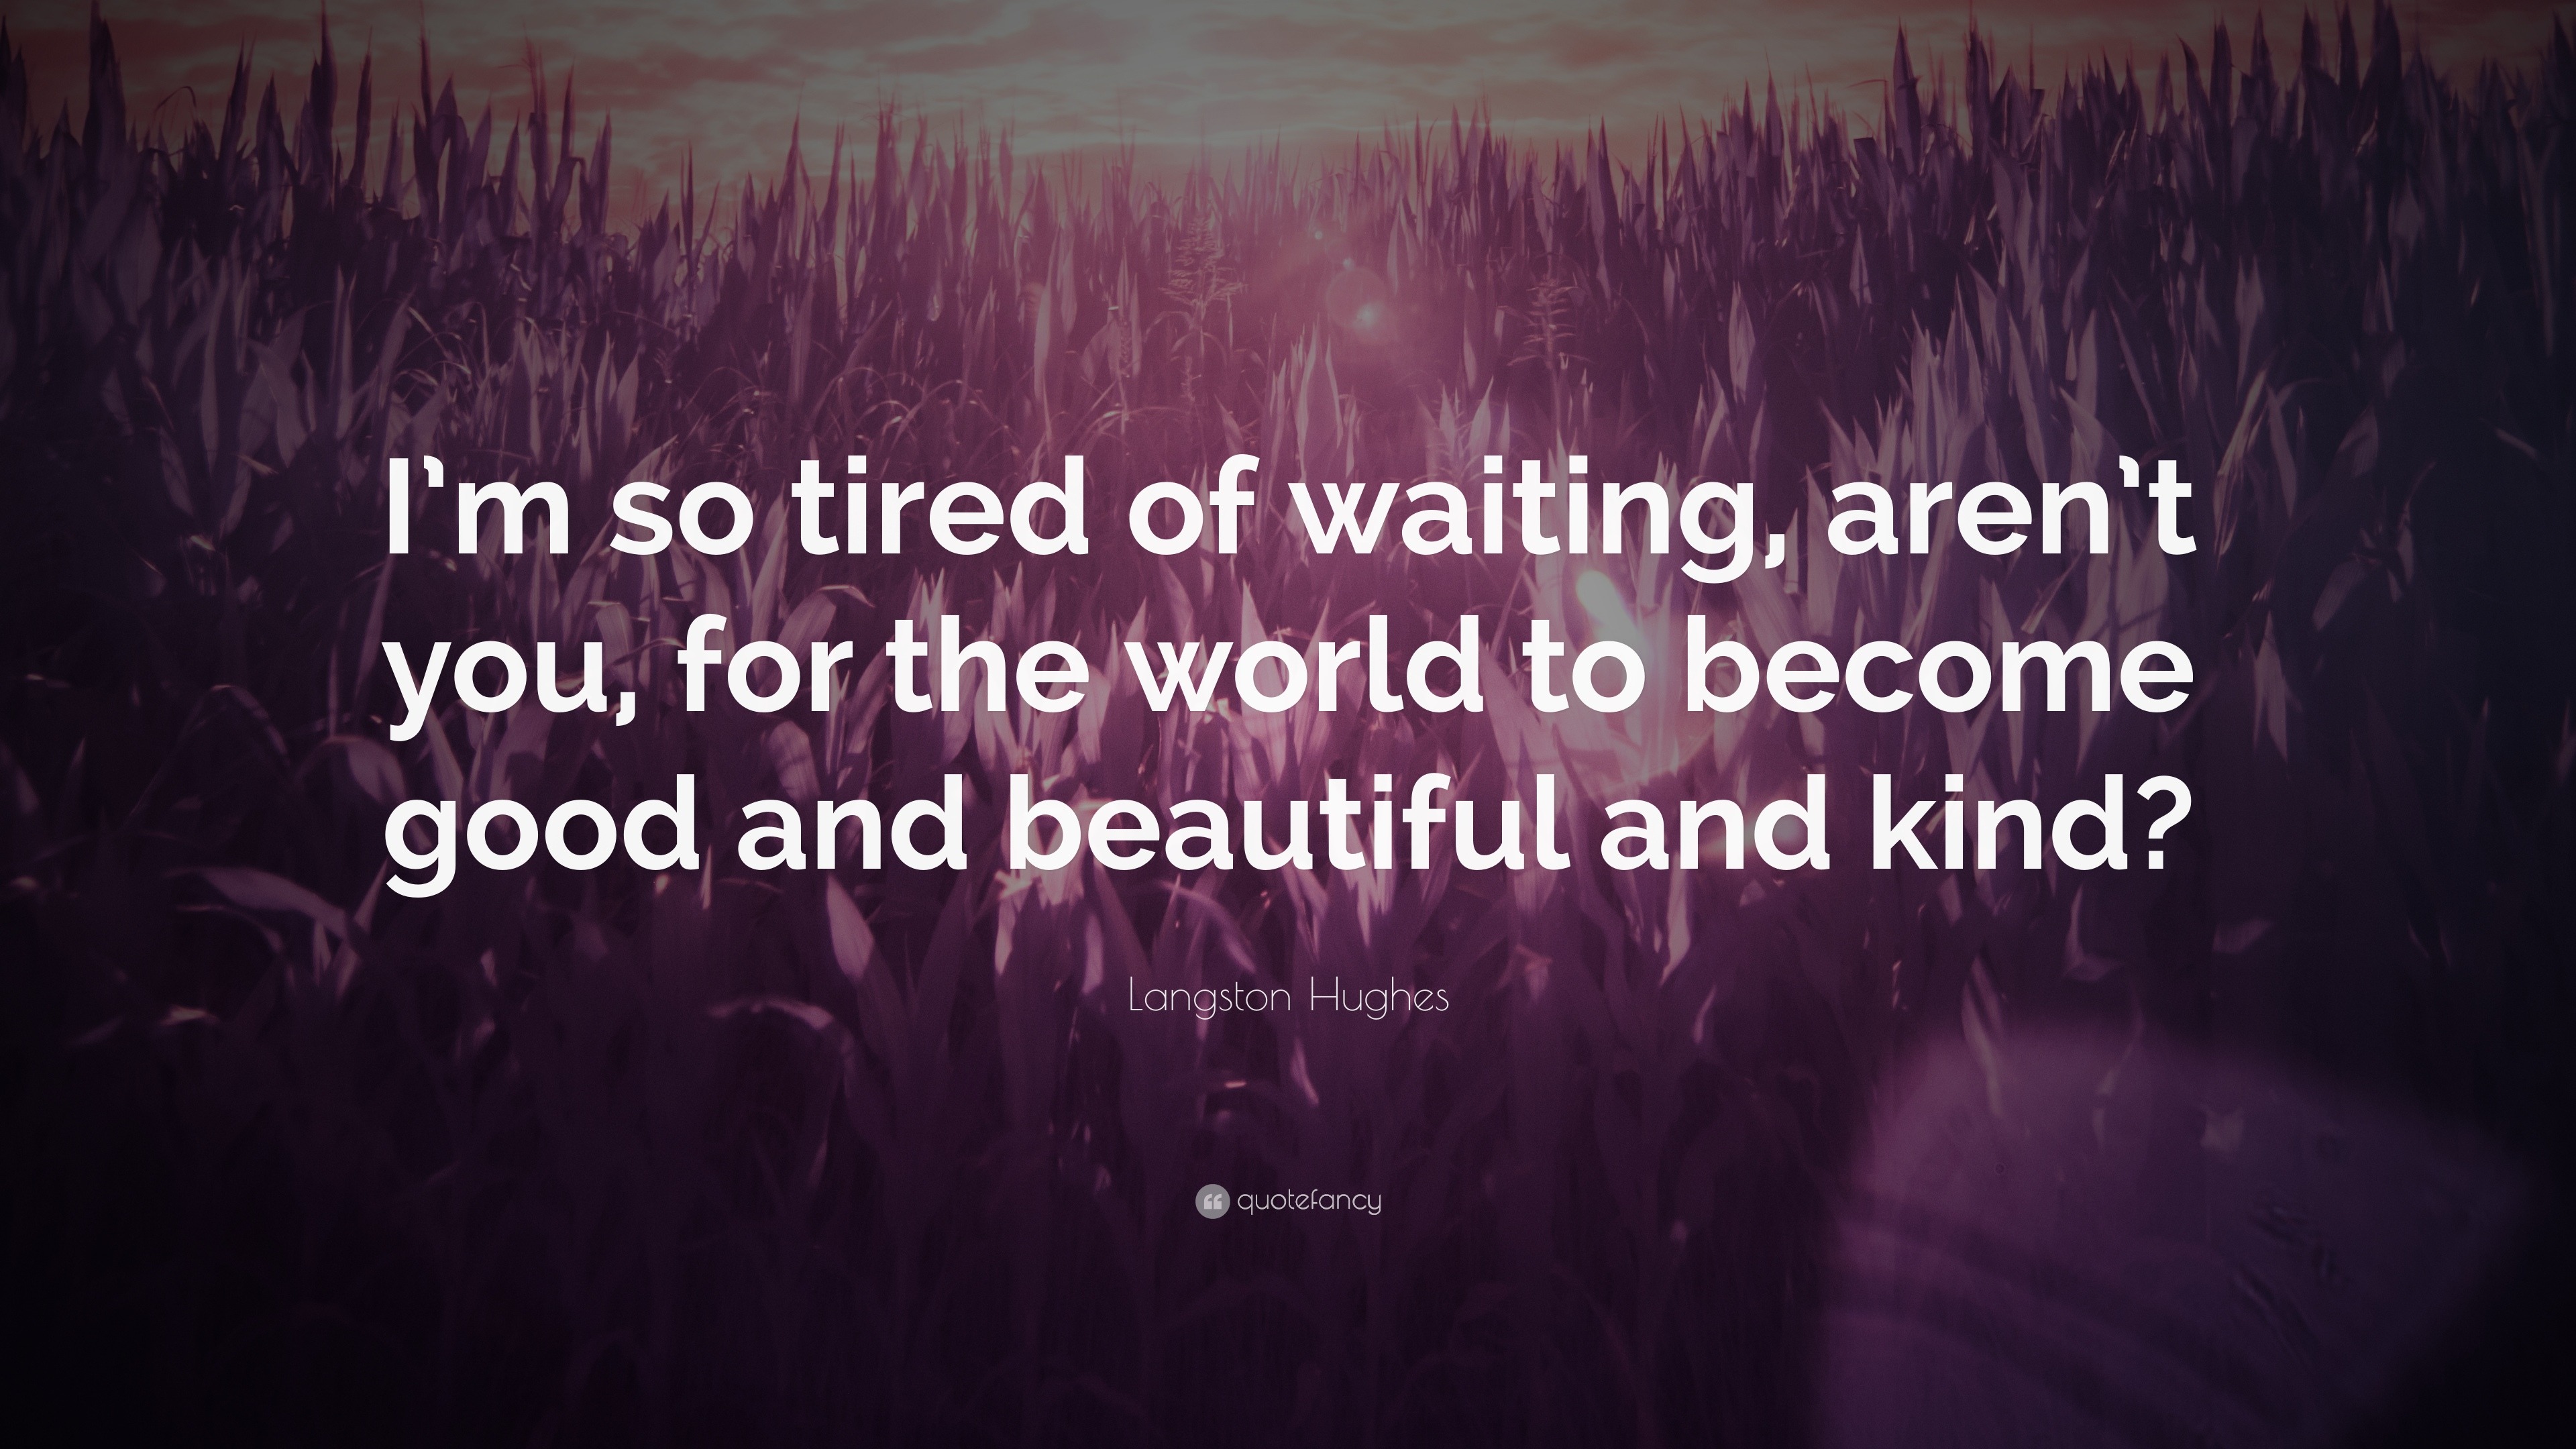 Langston Hughes Quote: “I’m so tired of waiting, aren’t you, for the